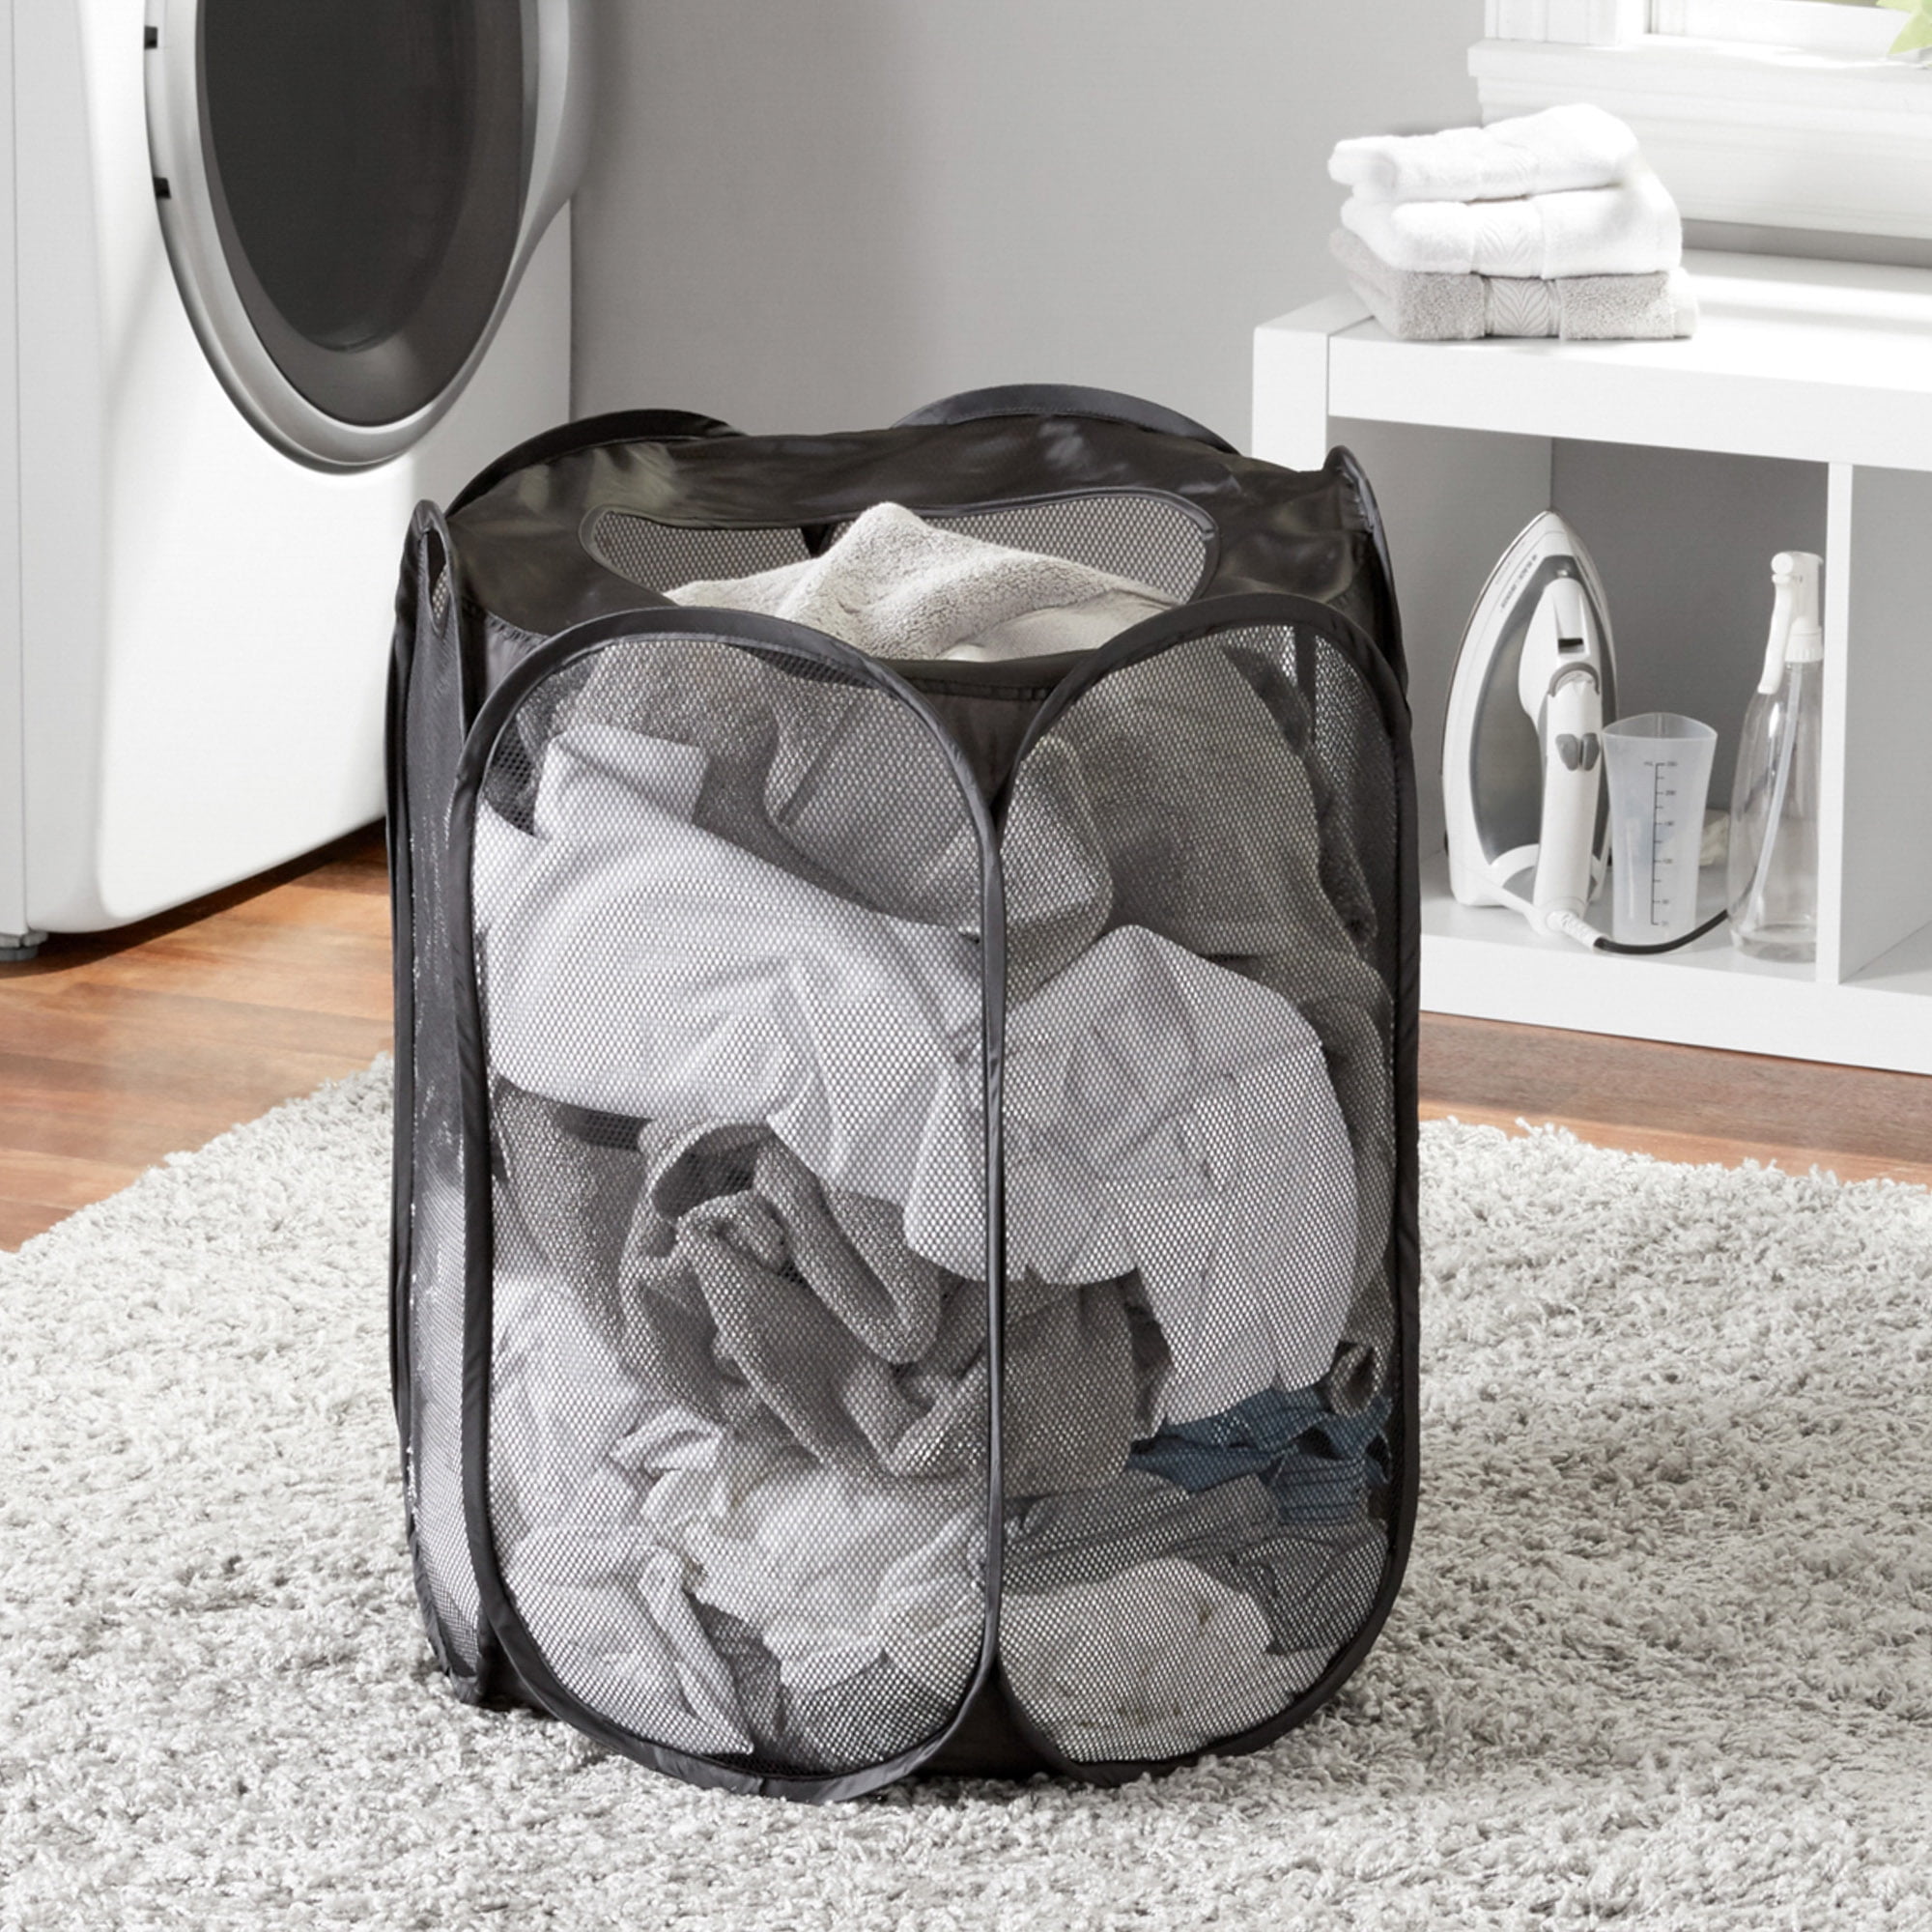 Room Essentials Heavy Duty Roll Top Laundry Bag With Carry Strap Gold Tan Rugged 